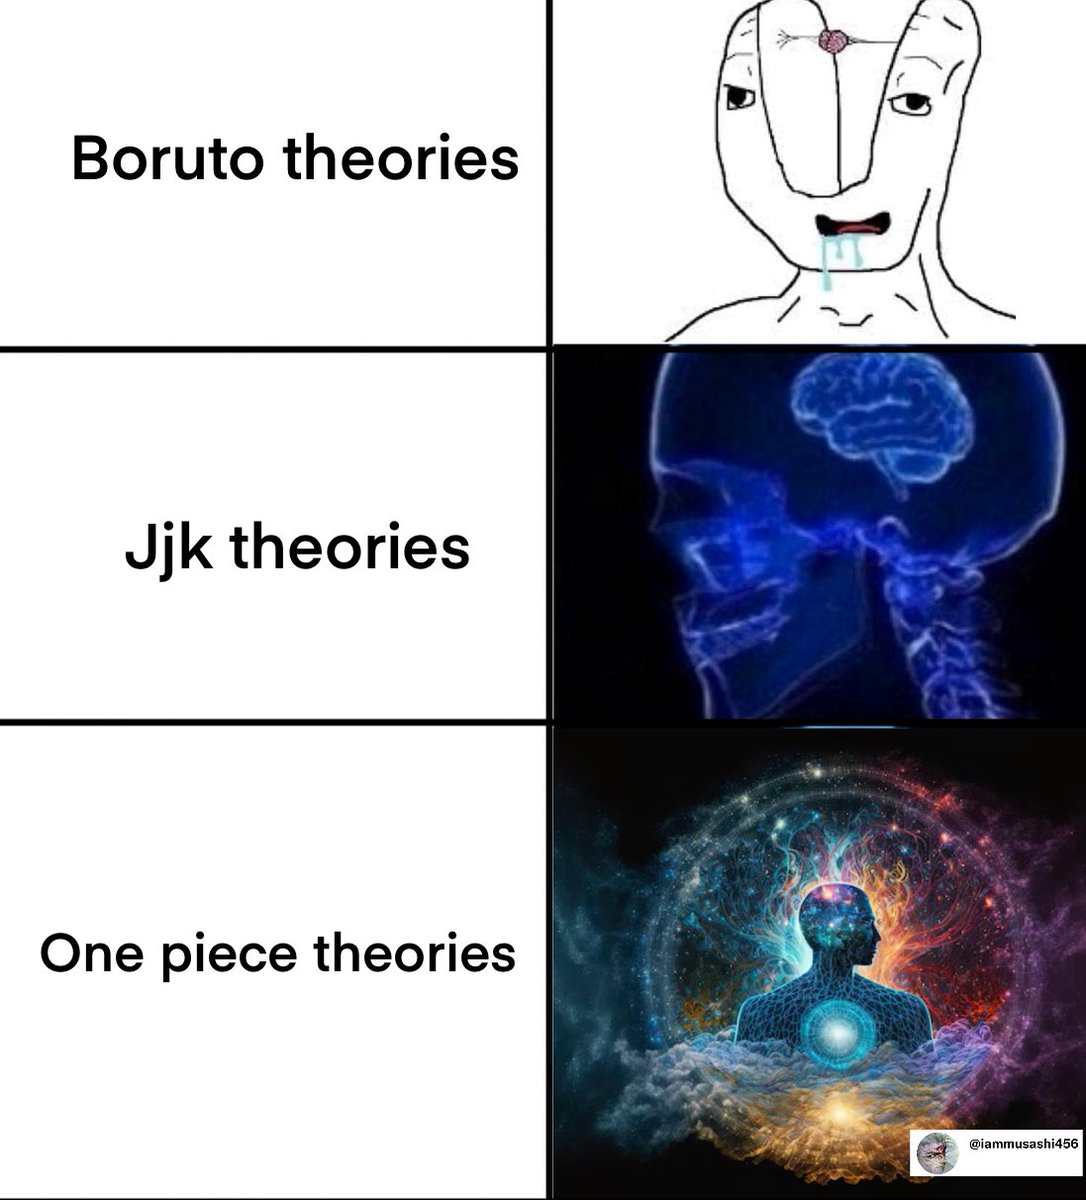 One Piece theories are at god level🔥